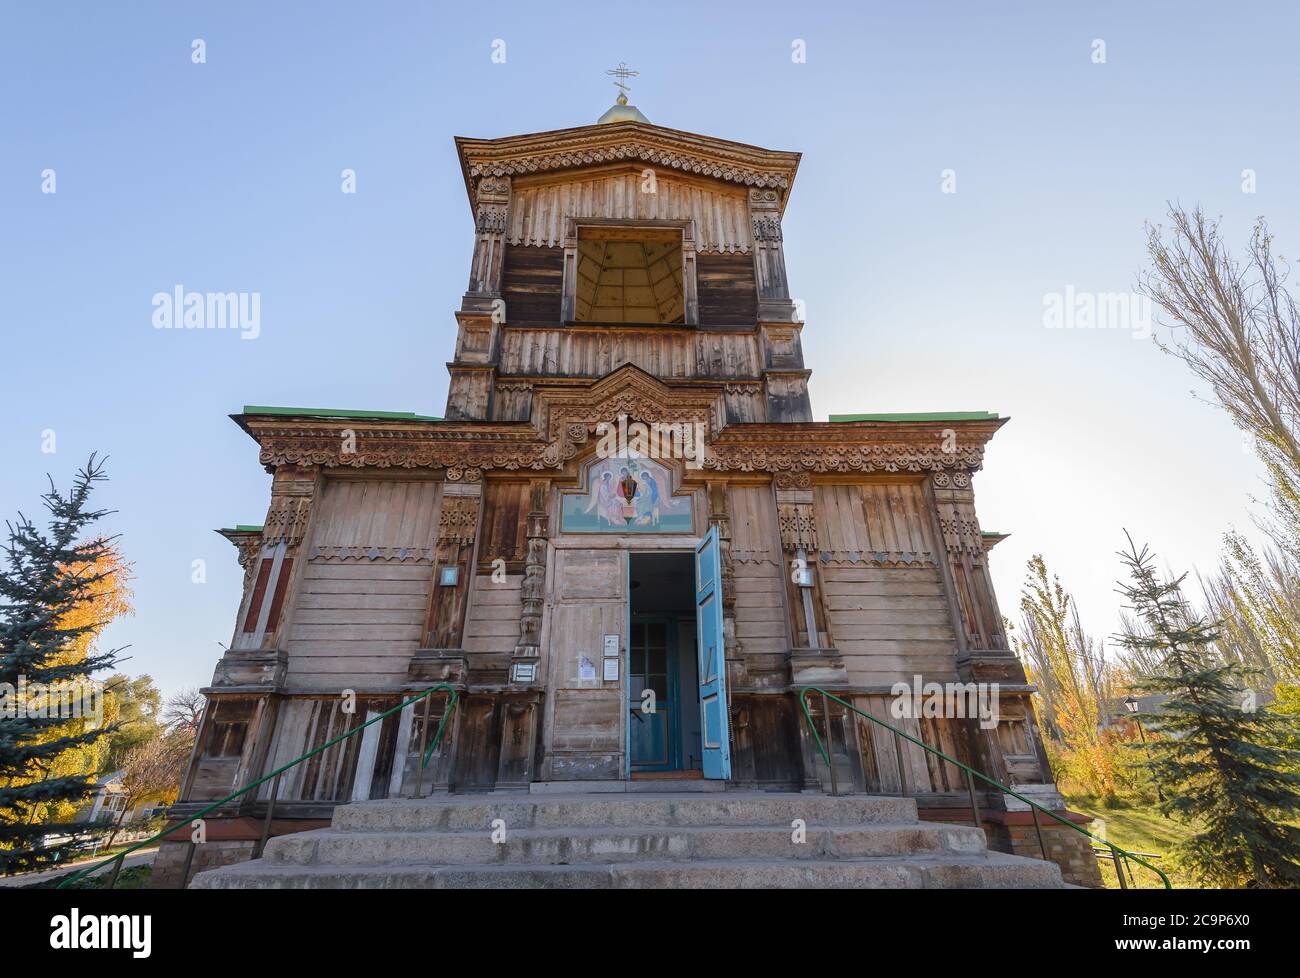 Main entrance of Holy Trinity Orthodox Church in Karakol, Kyrgyzstan. Wooden Cathedral with facade decorated with carvings. Stock Photo